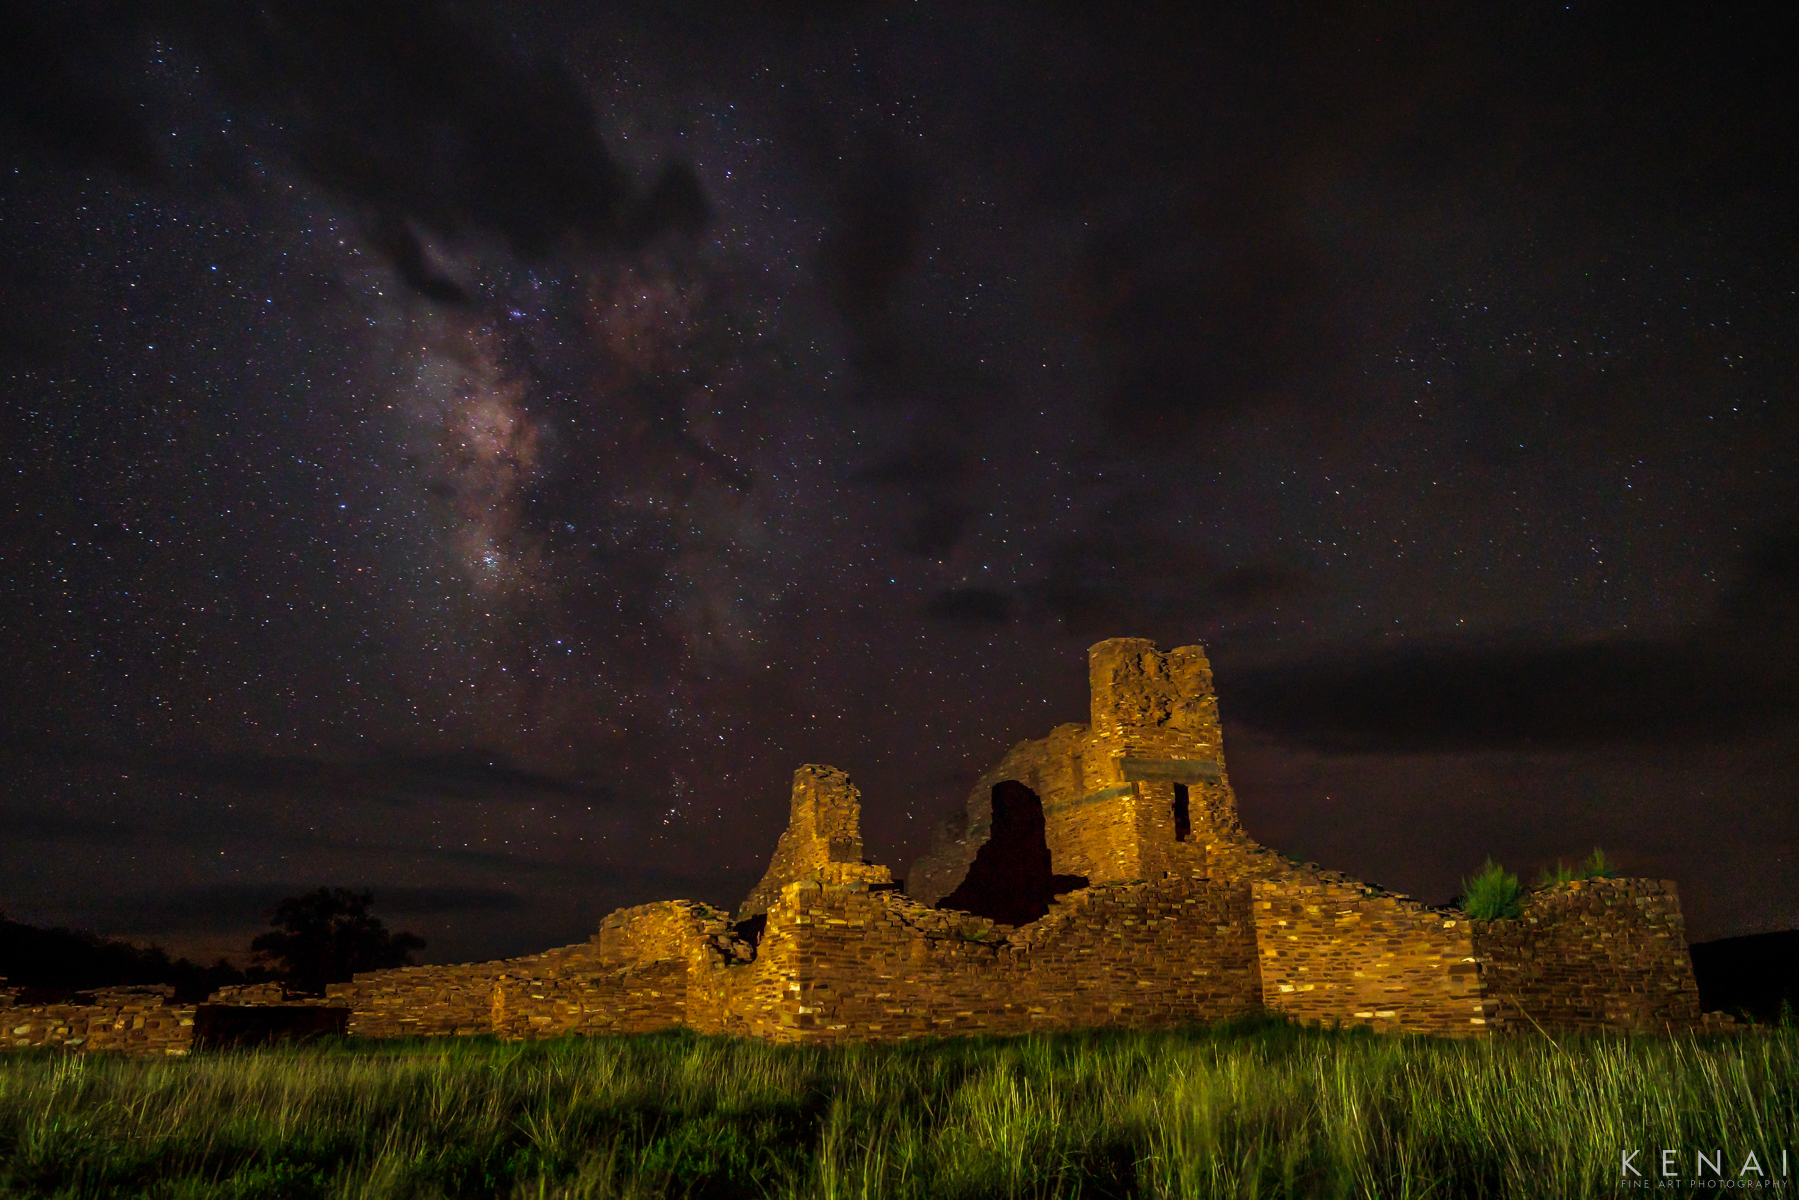 The Abo Salt Mission Ruins appear beneath the milky way in this night photo. 